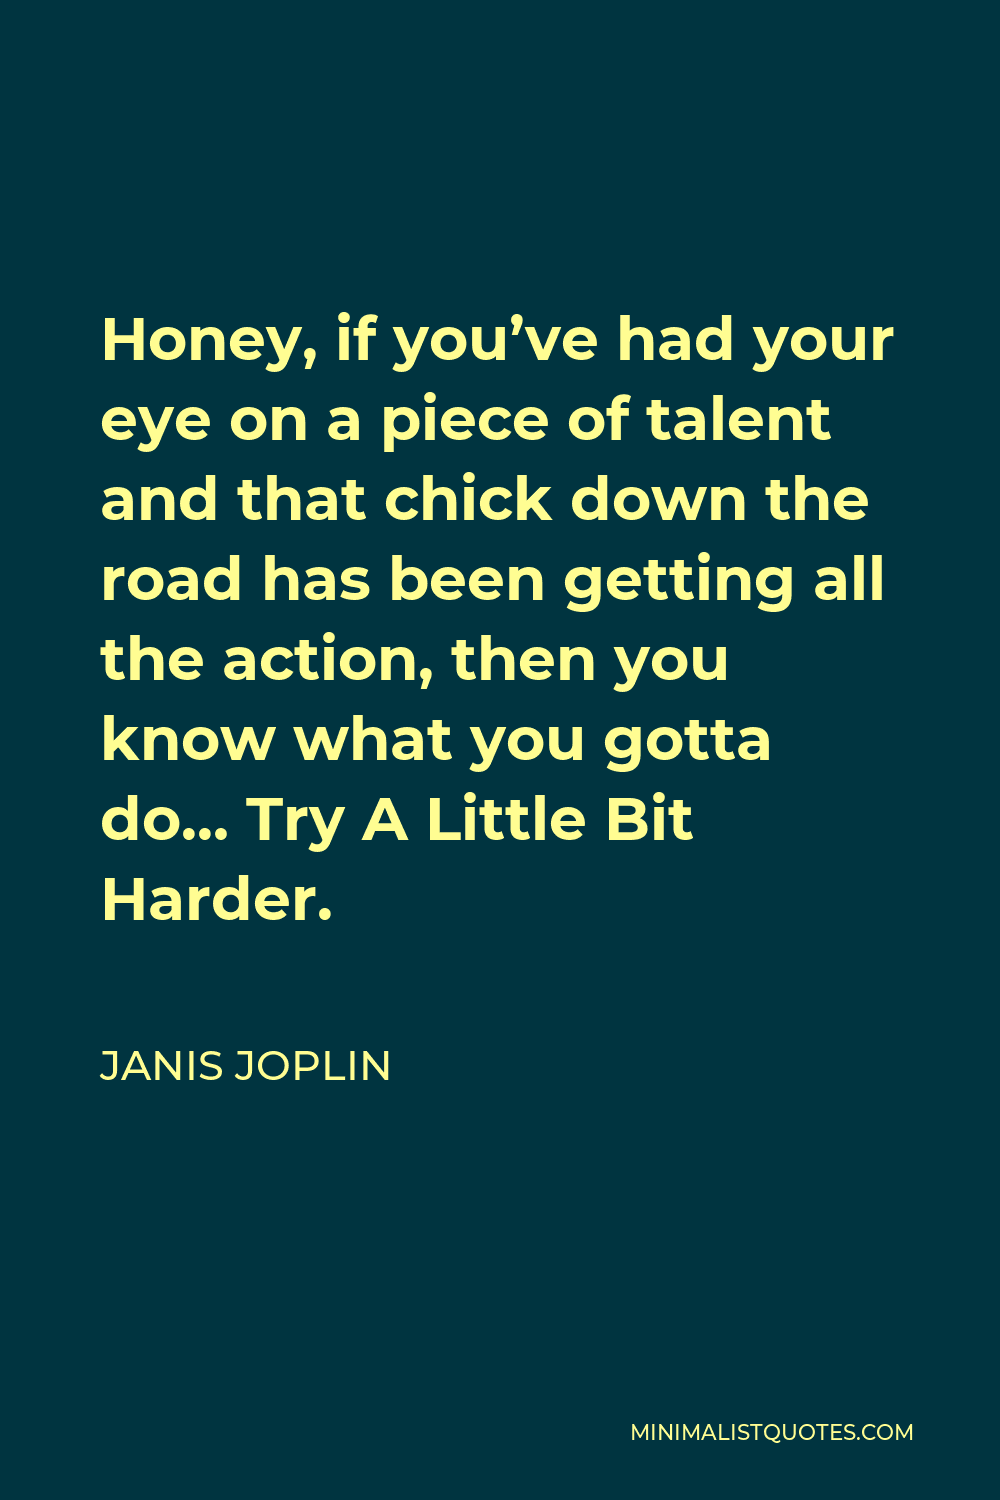 Janis Joplin Quote - Honey, if you’ve had your eye on a piece of talent and that chick down the road has been getting all the action, then you know what you gotta do… Try A Little Bit Harder.